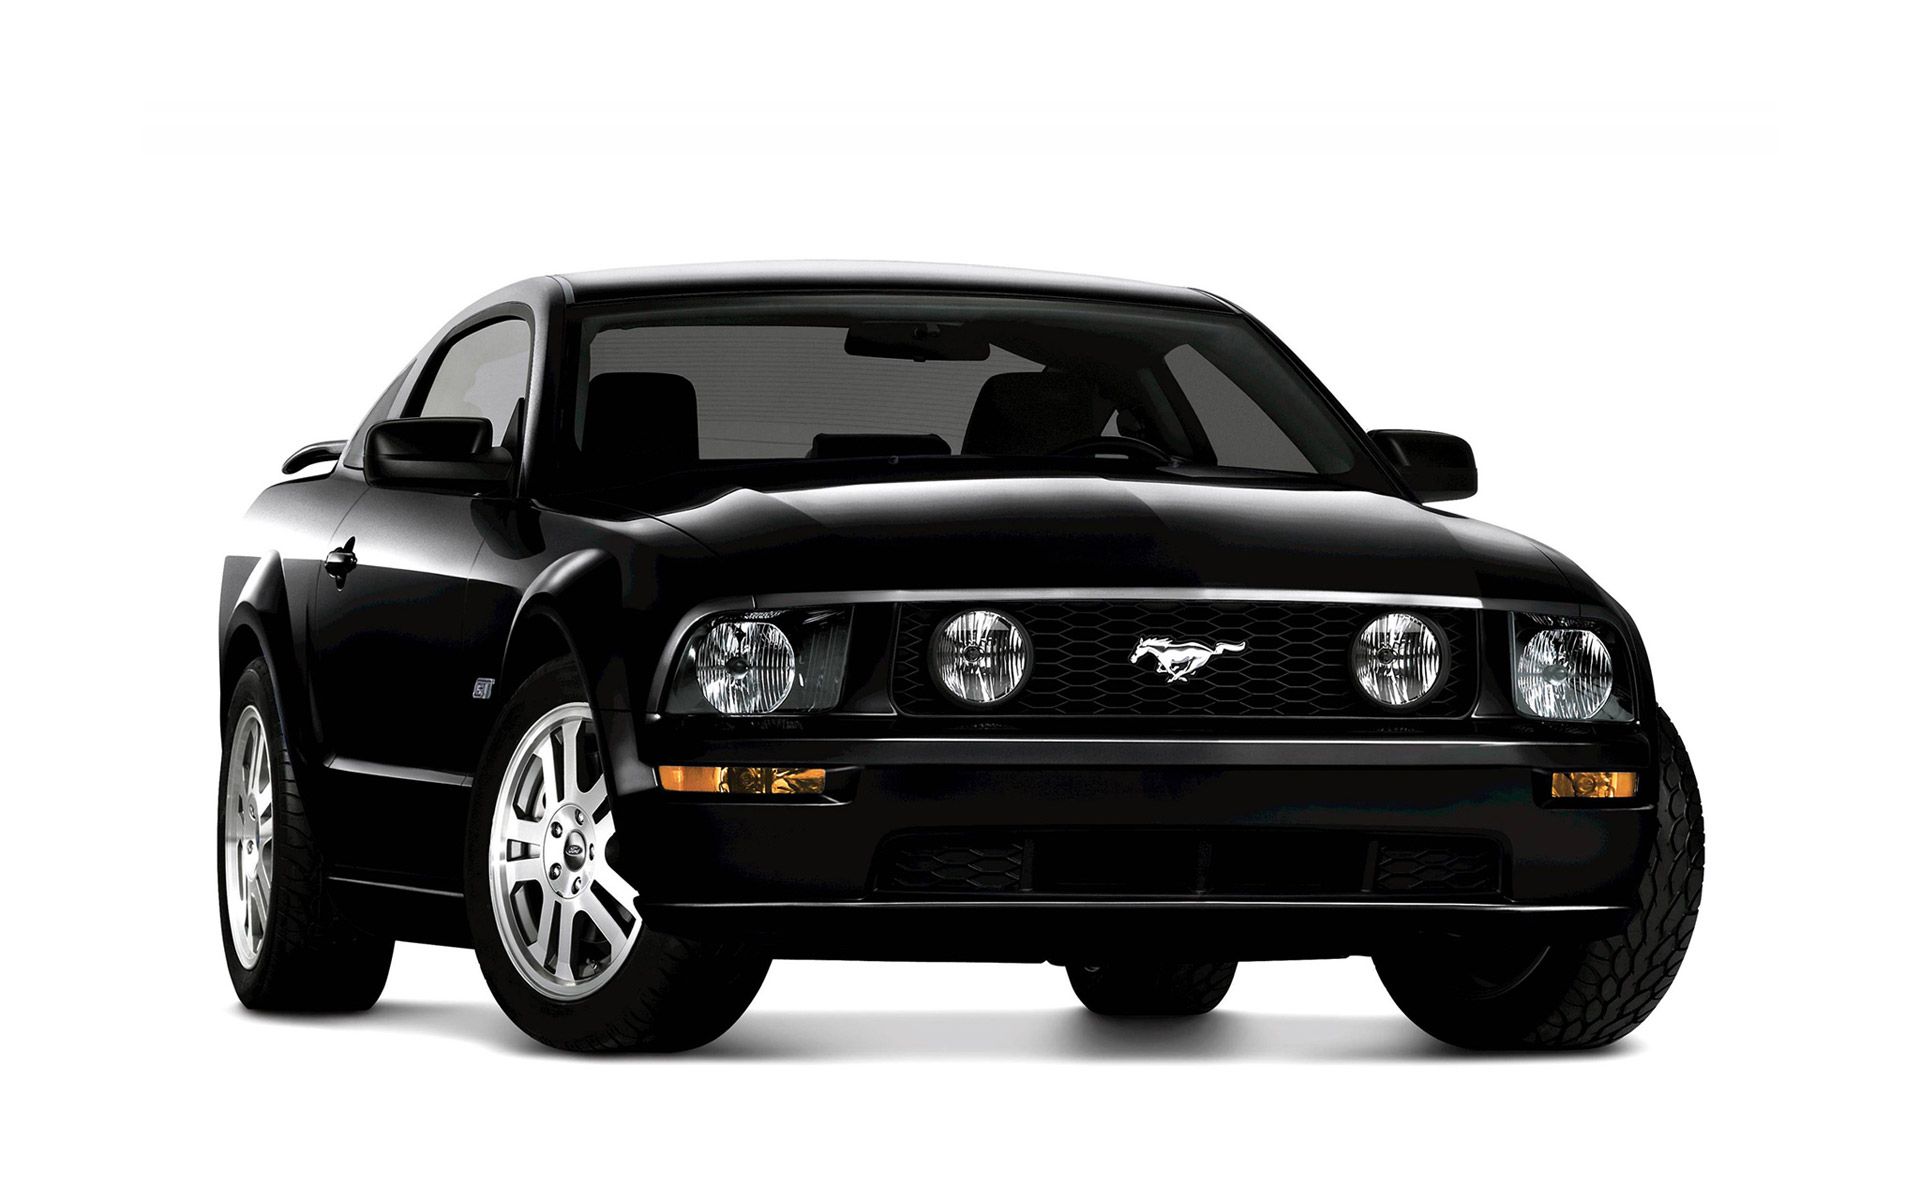 2005-Ford-Mustang-GT-008-1200